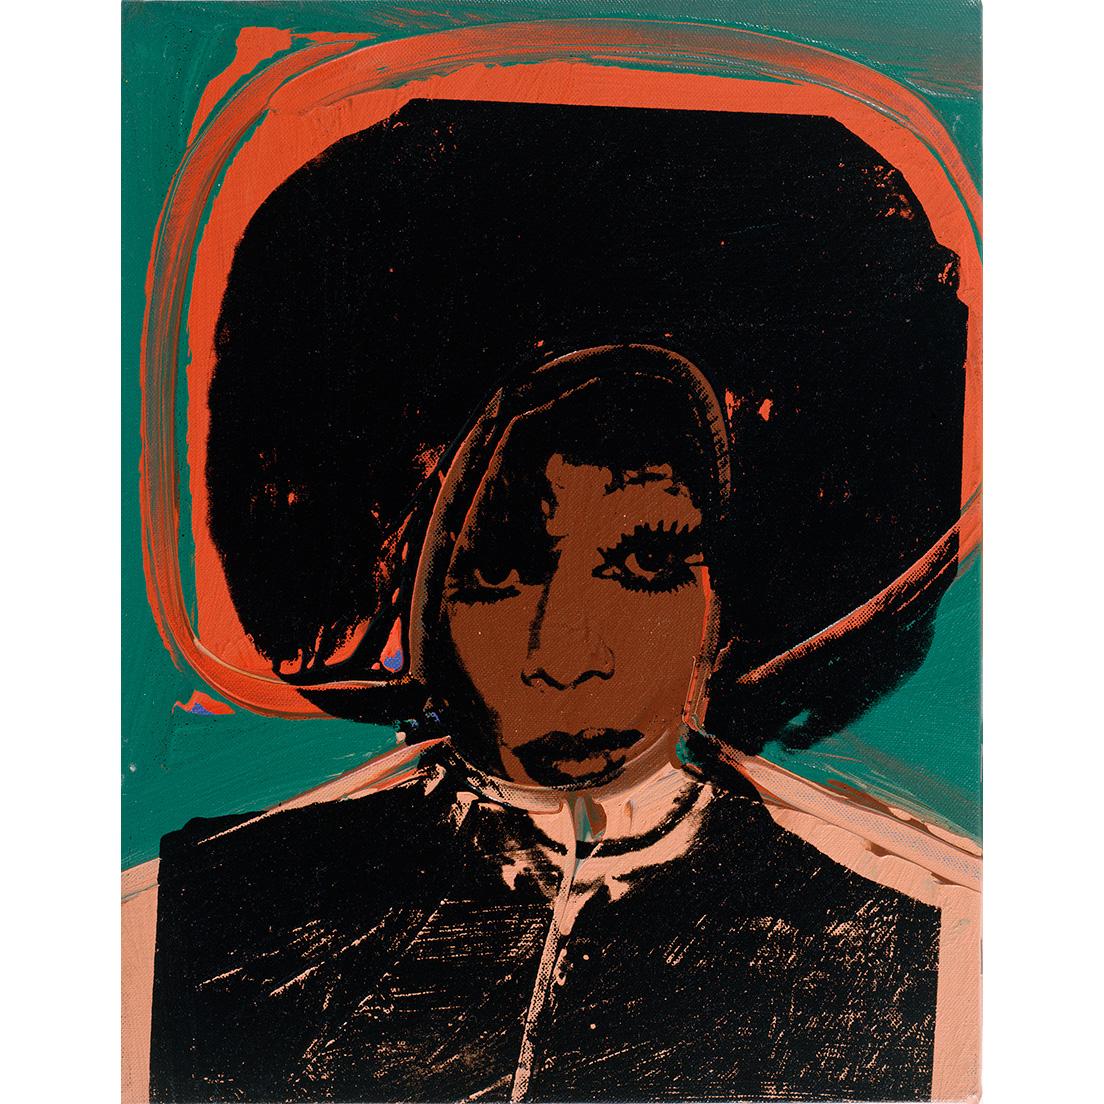 《Ladies &amp; Gentlemen (Helen, Henry Morales)》（1975年）Italian private collection　© 2020 The Andy Warhol Foundation for the Visual Arts, Inc./ Licensed by DACS, London.